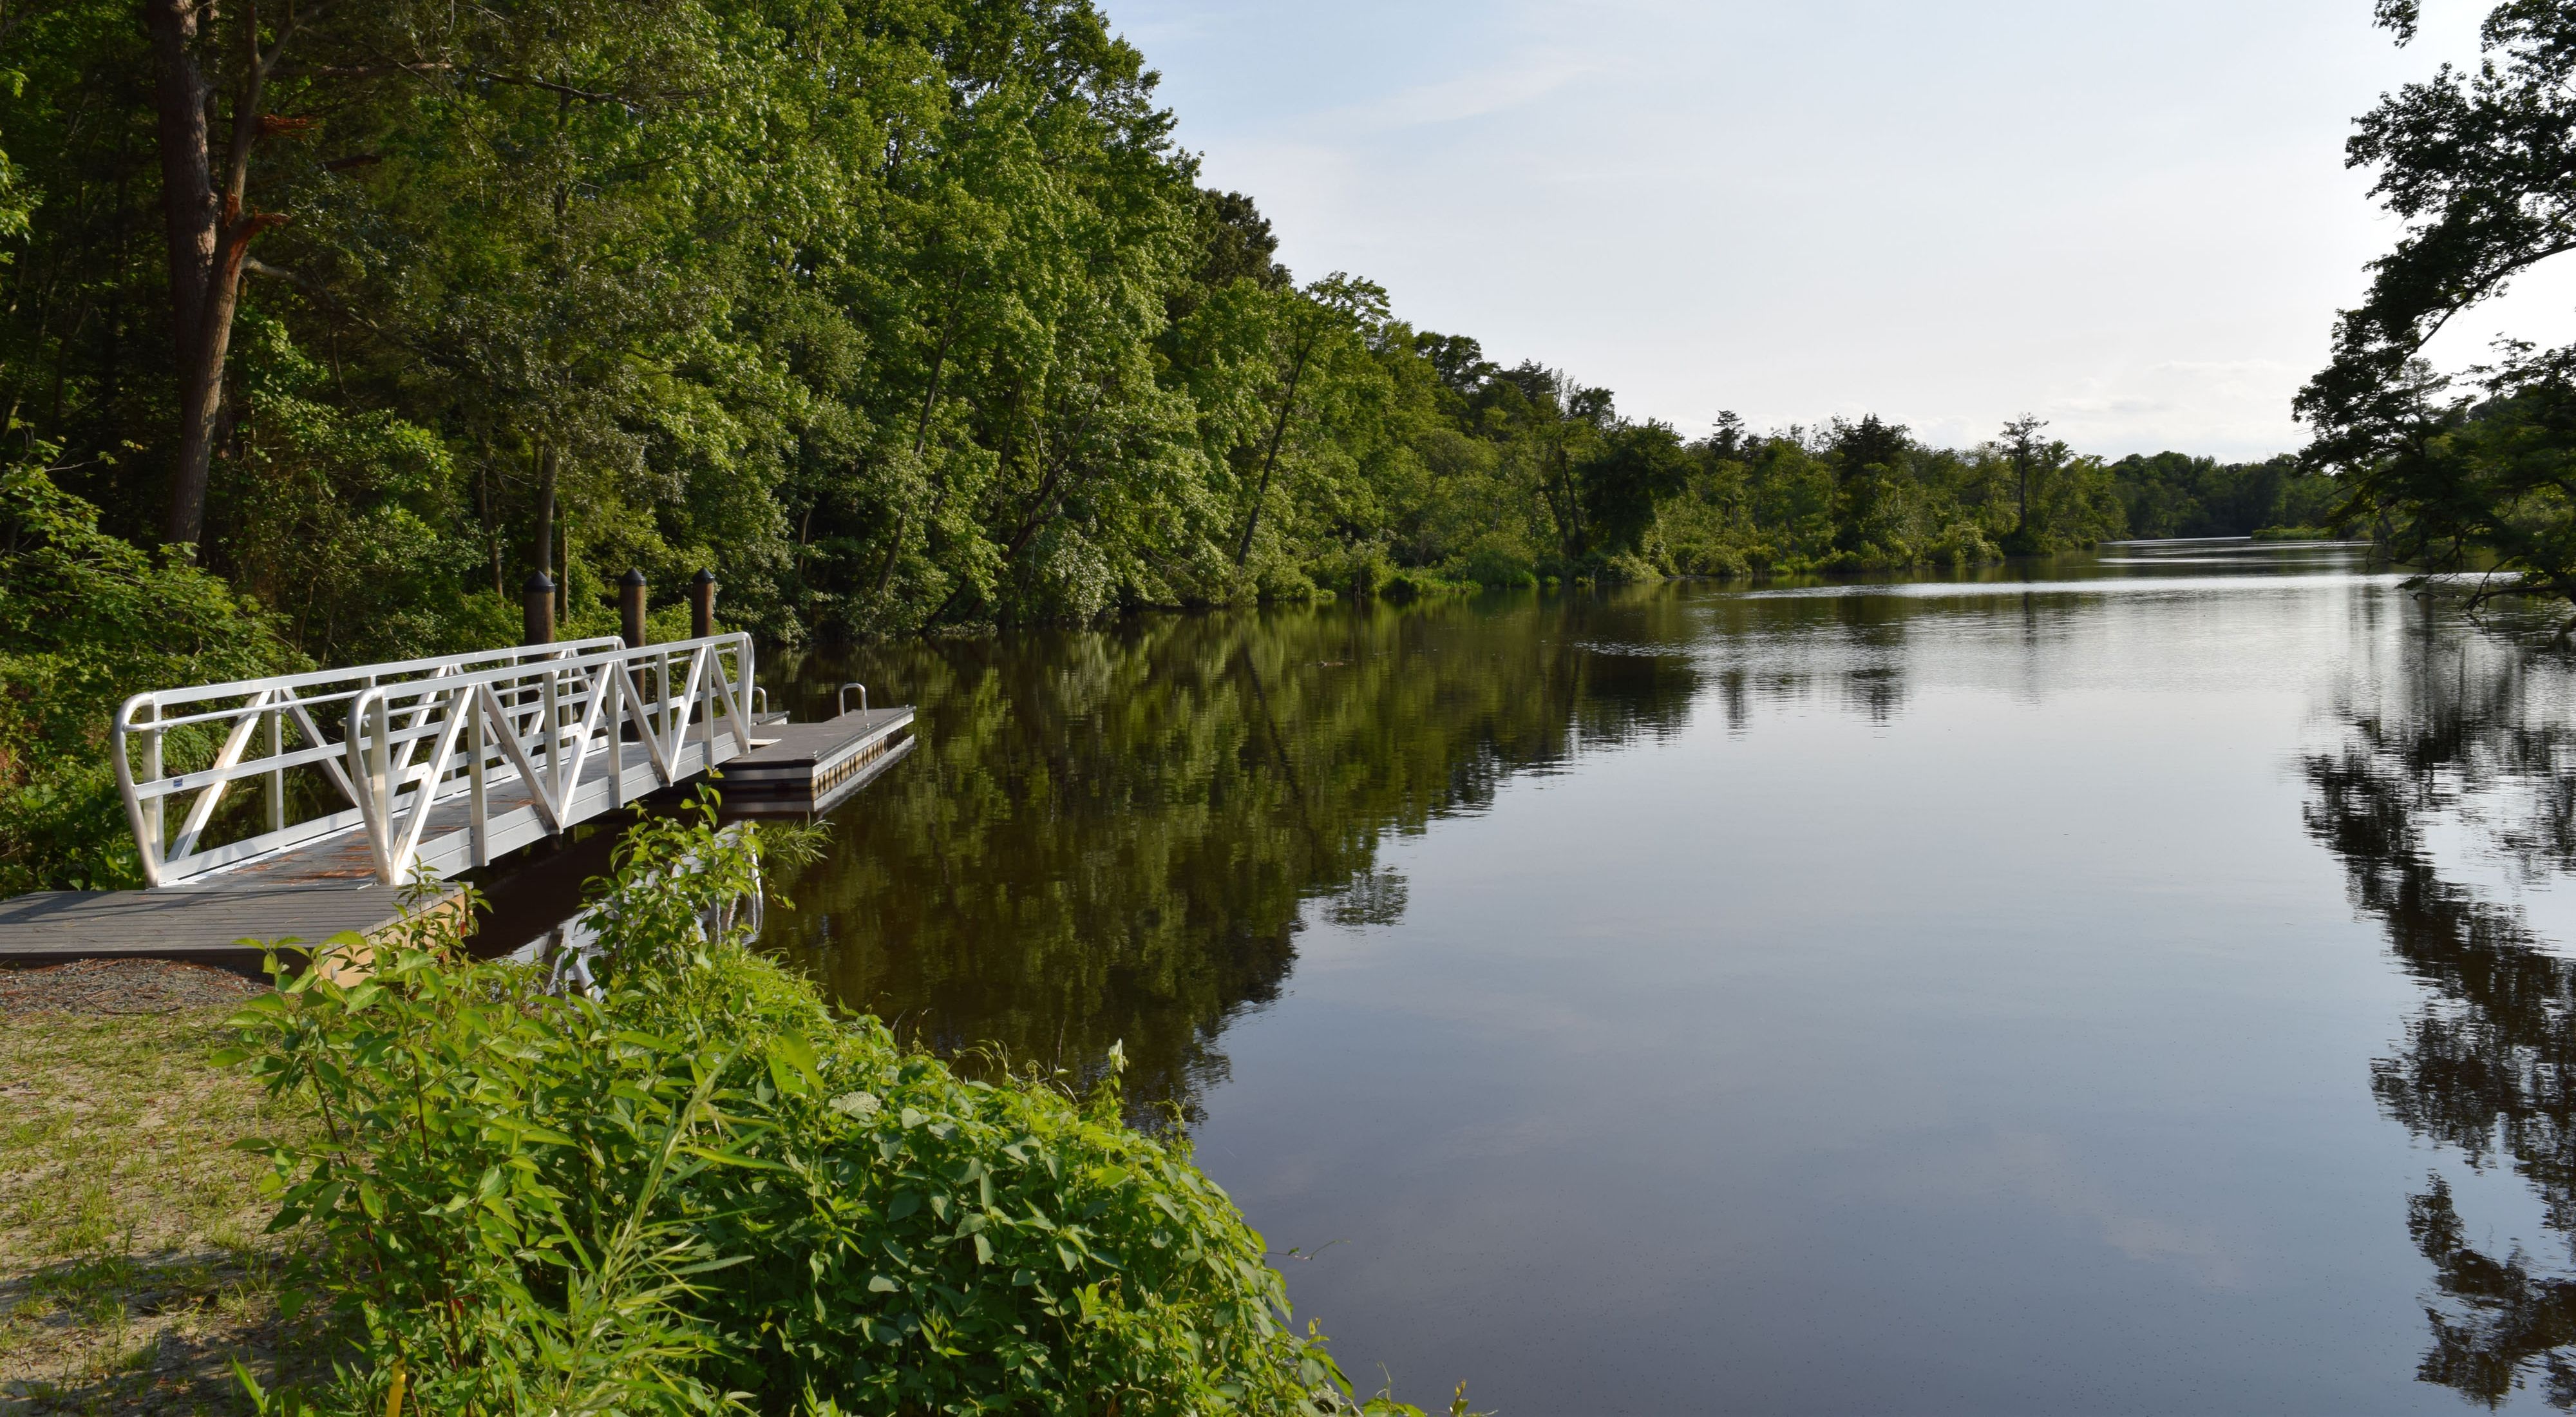 A short dock floats at the edge of the Broadkill River. The still surface of the water reflects the tall leafy green trees that line the river's edge.